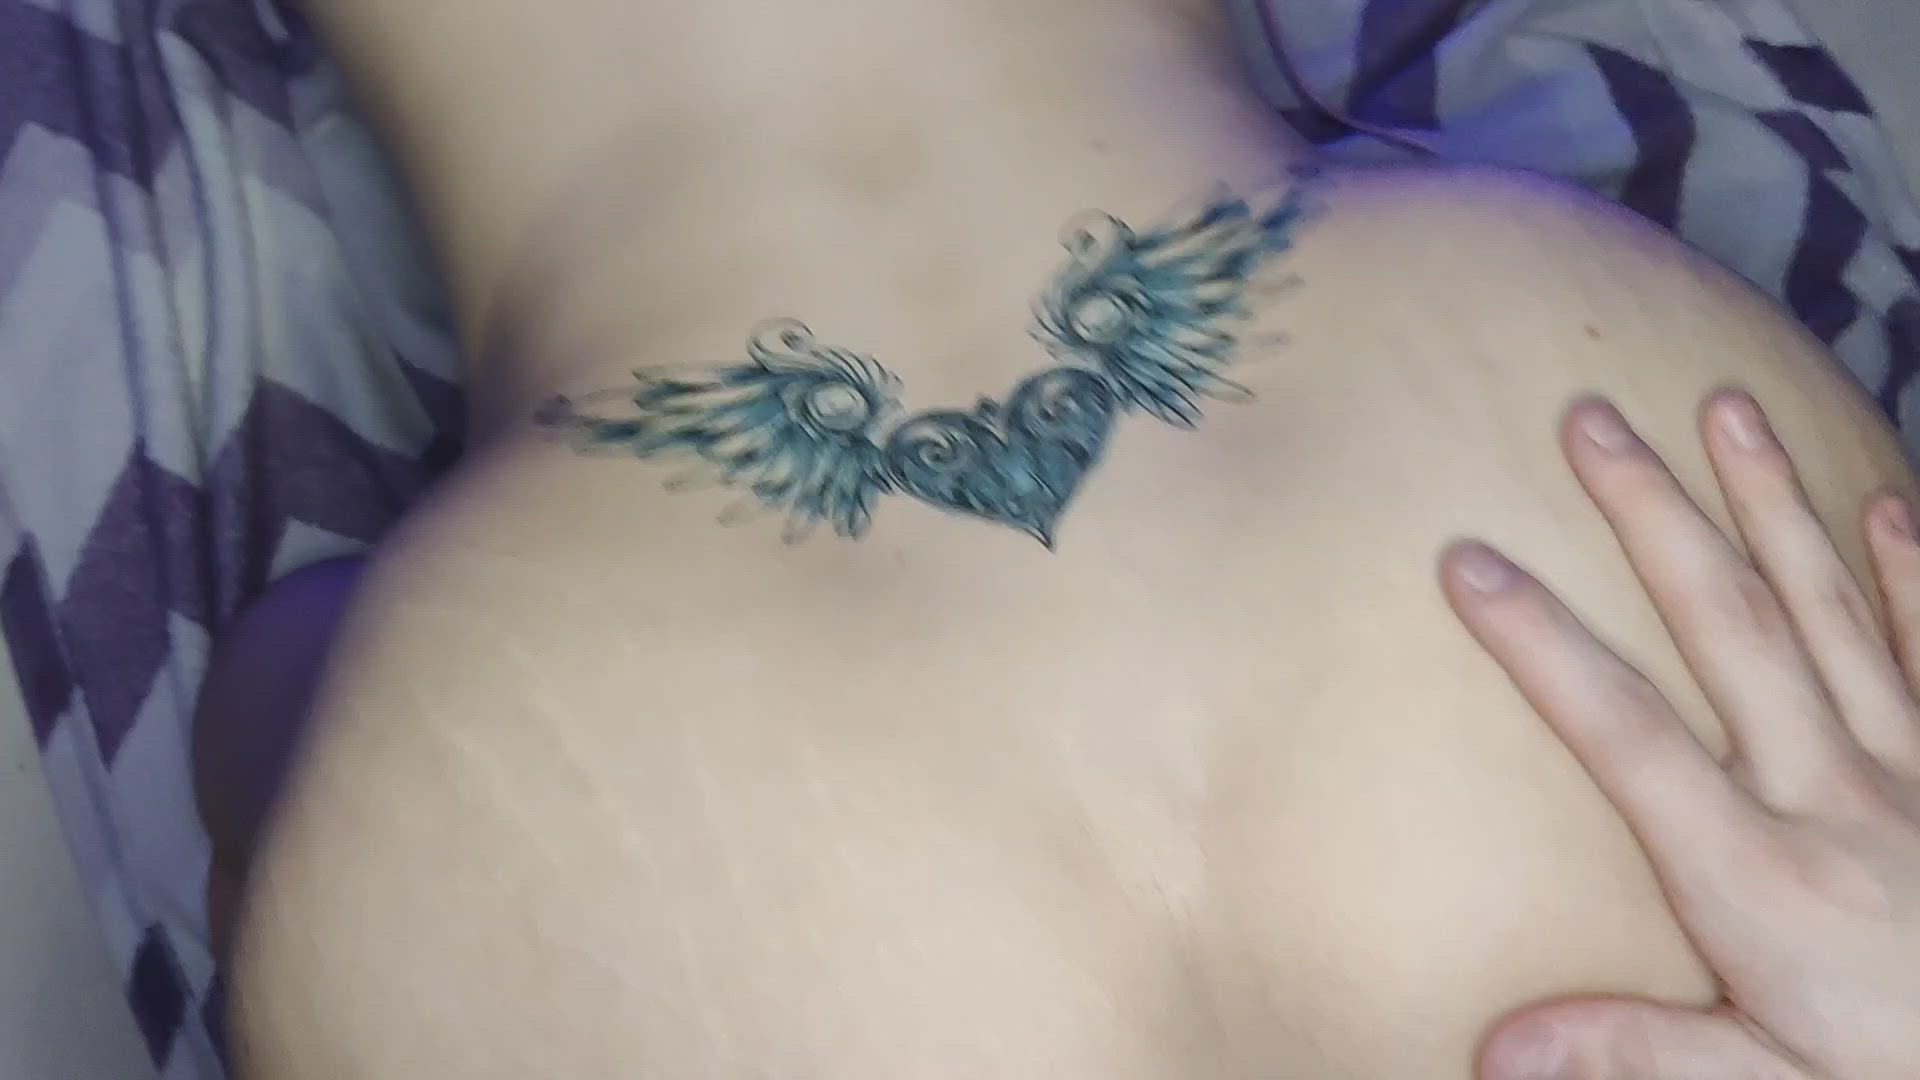 Creampie porn video with onlyfans model ZeroSenpaii <strong>@zerosenpaii</strong>